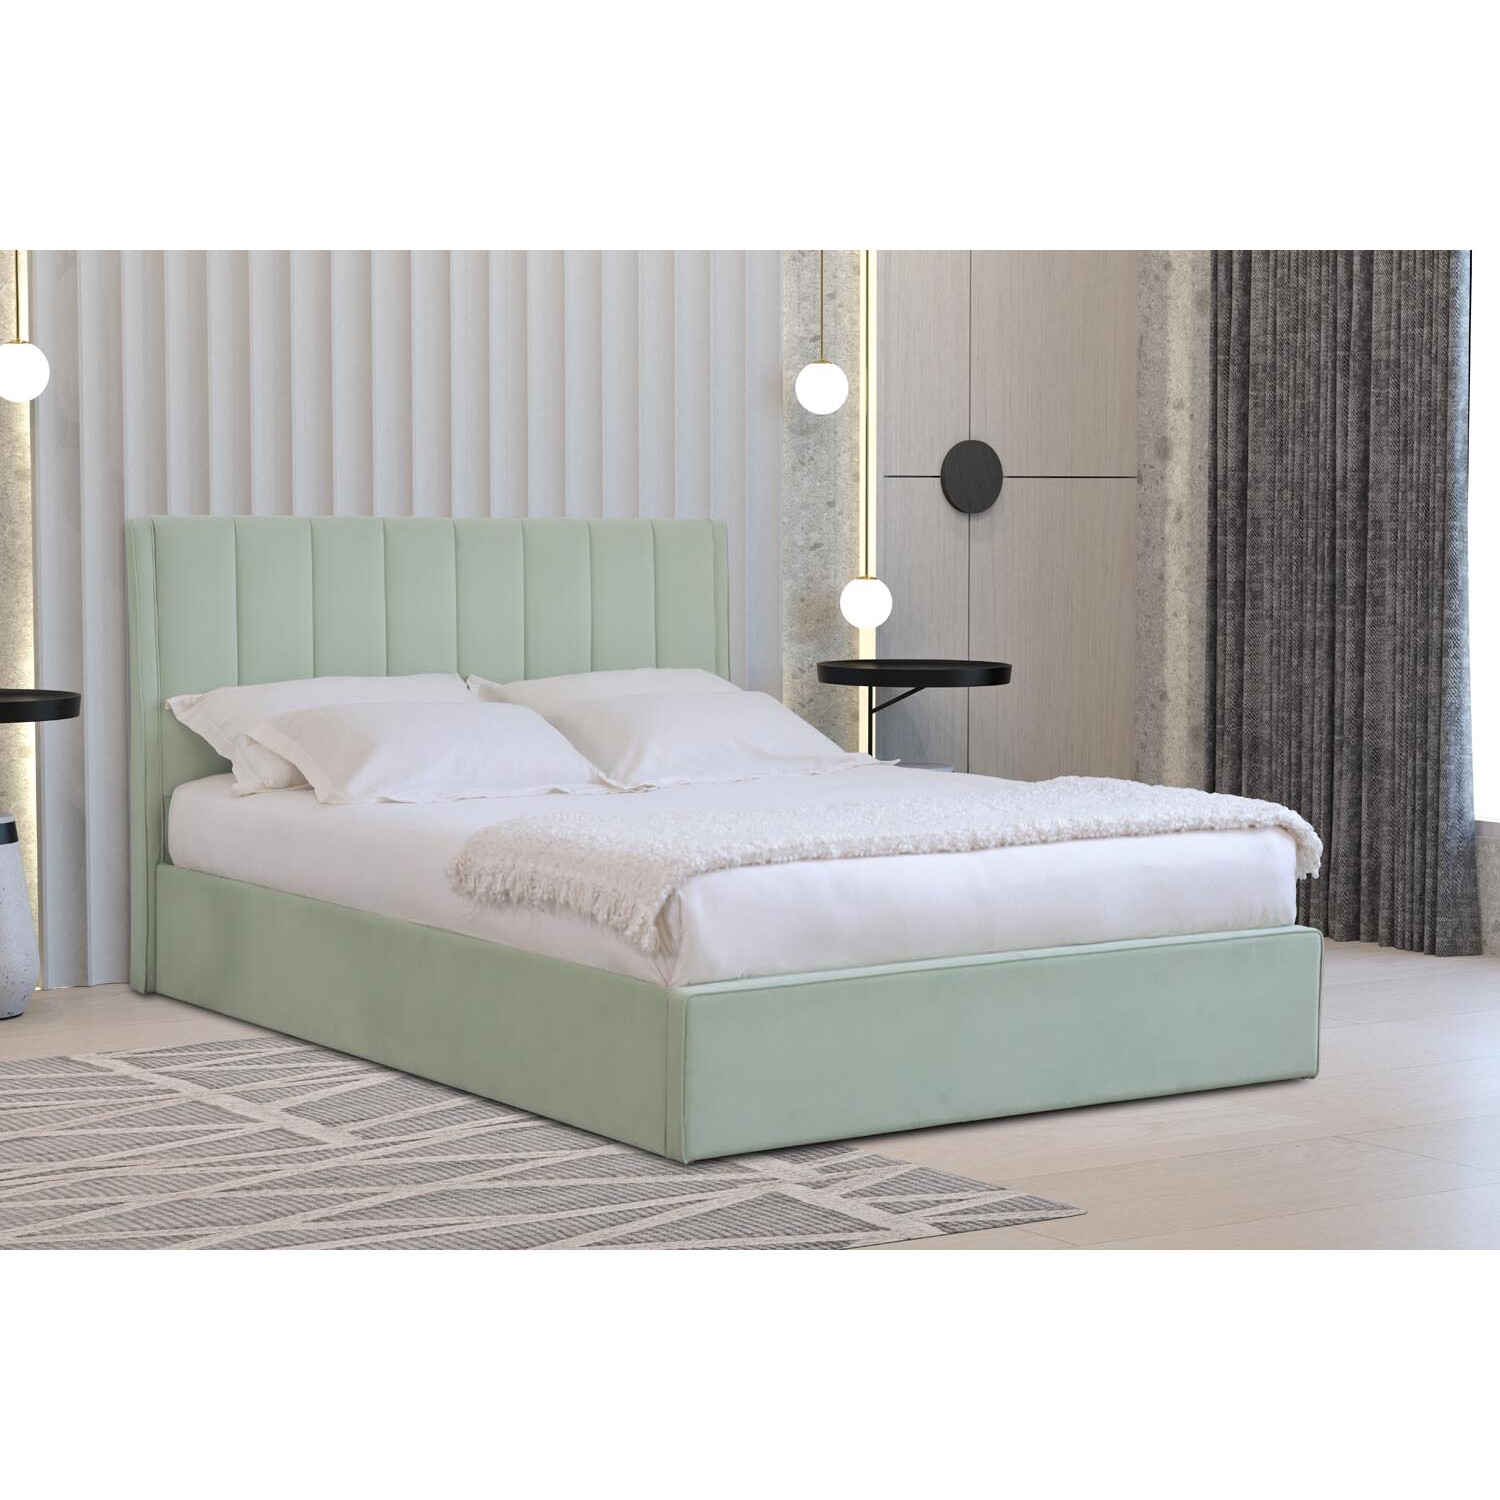 Willow Super King Size Mint Ottoman Bed Image 7